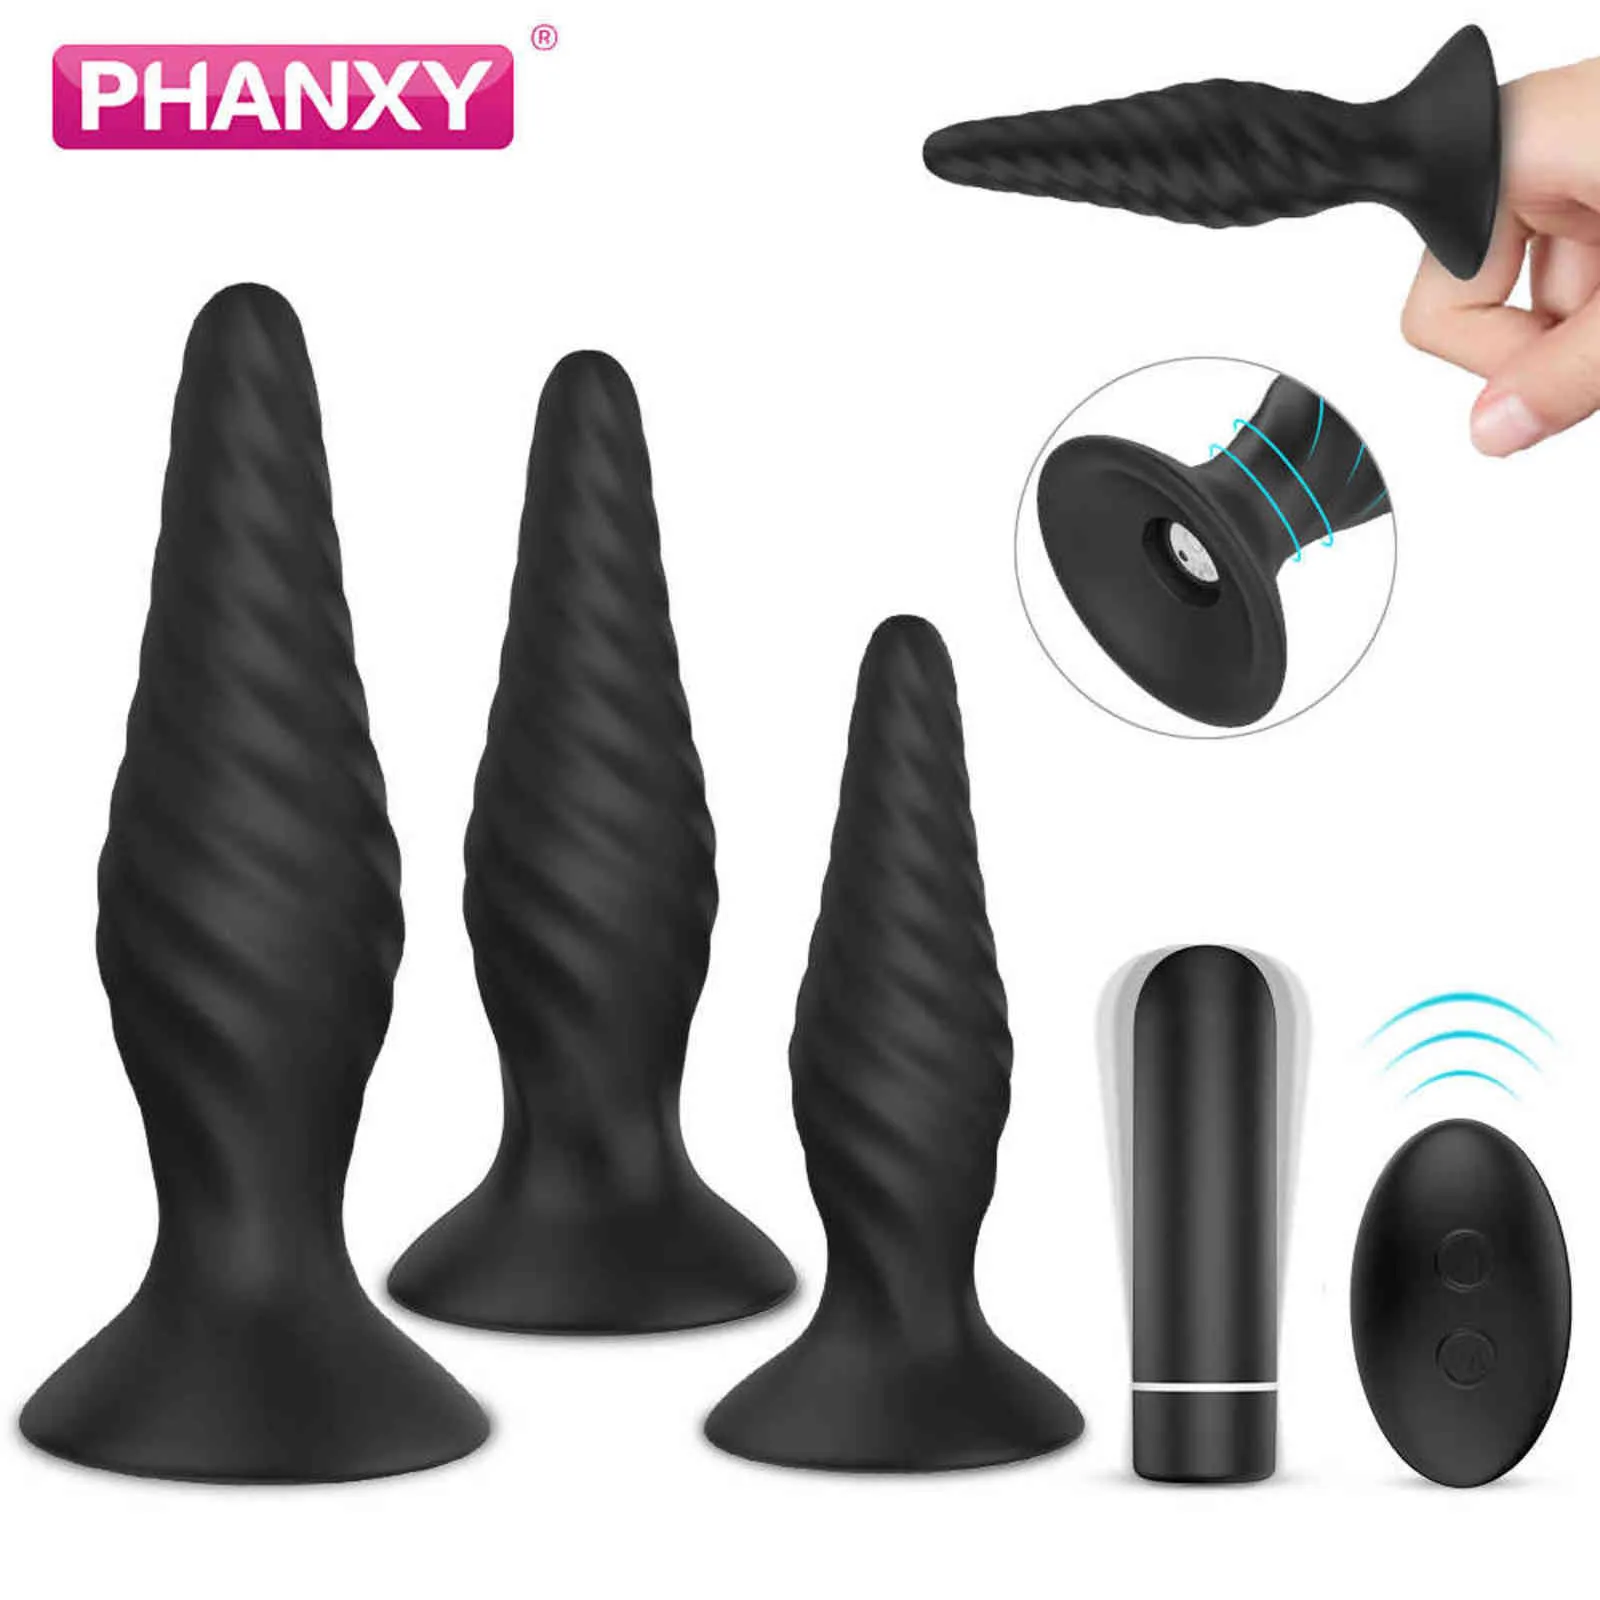 NXY Sex Anale Speelgoed Phanxy Butt Plug Set Dilator Buis Grote enorme Toy Vibrator Vibrating Ass Gay Cork Silicone voor Man Dames Producten 1201